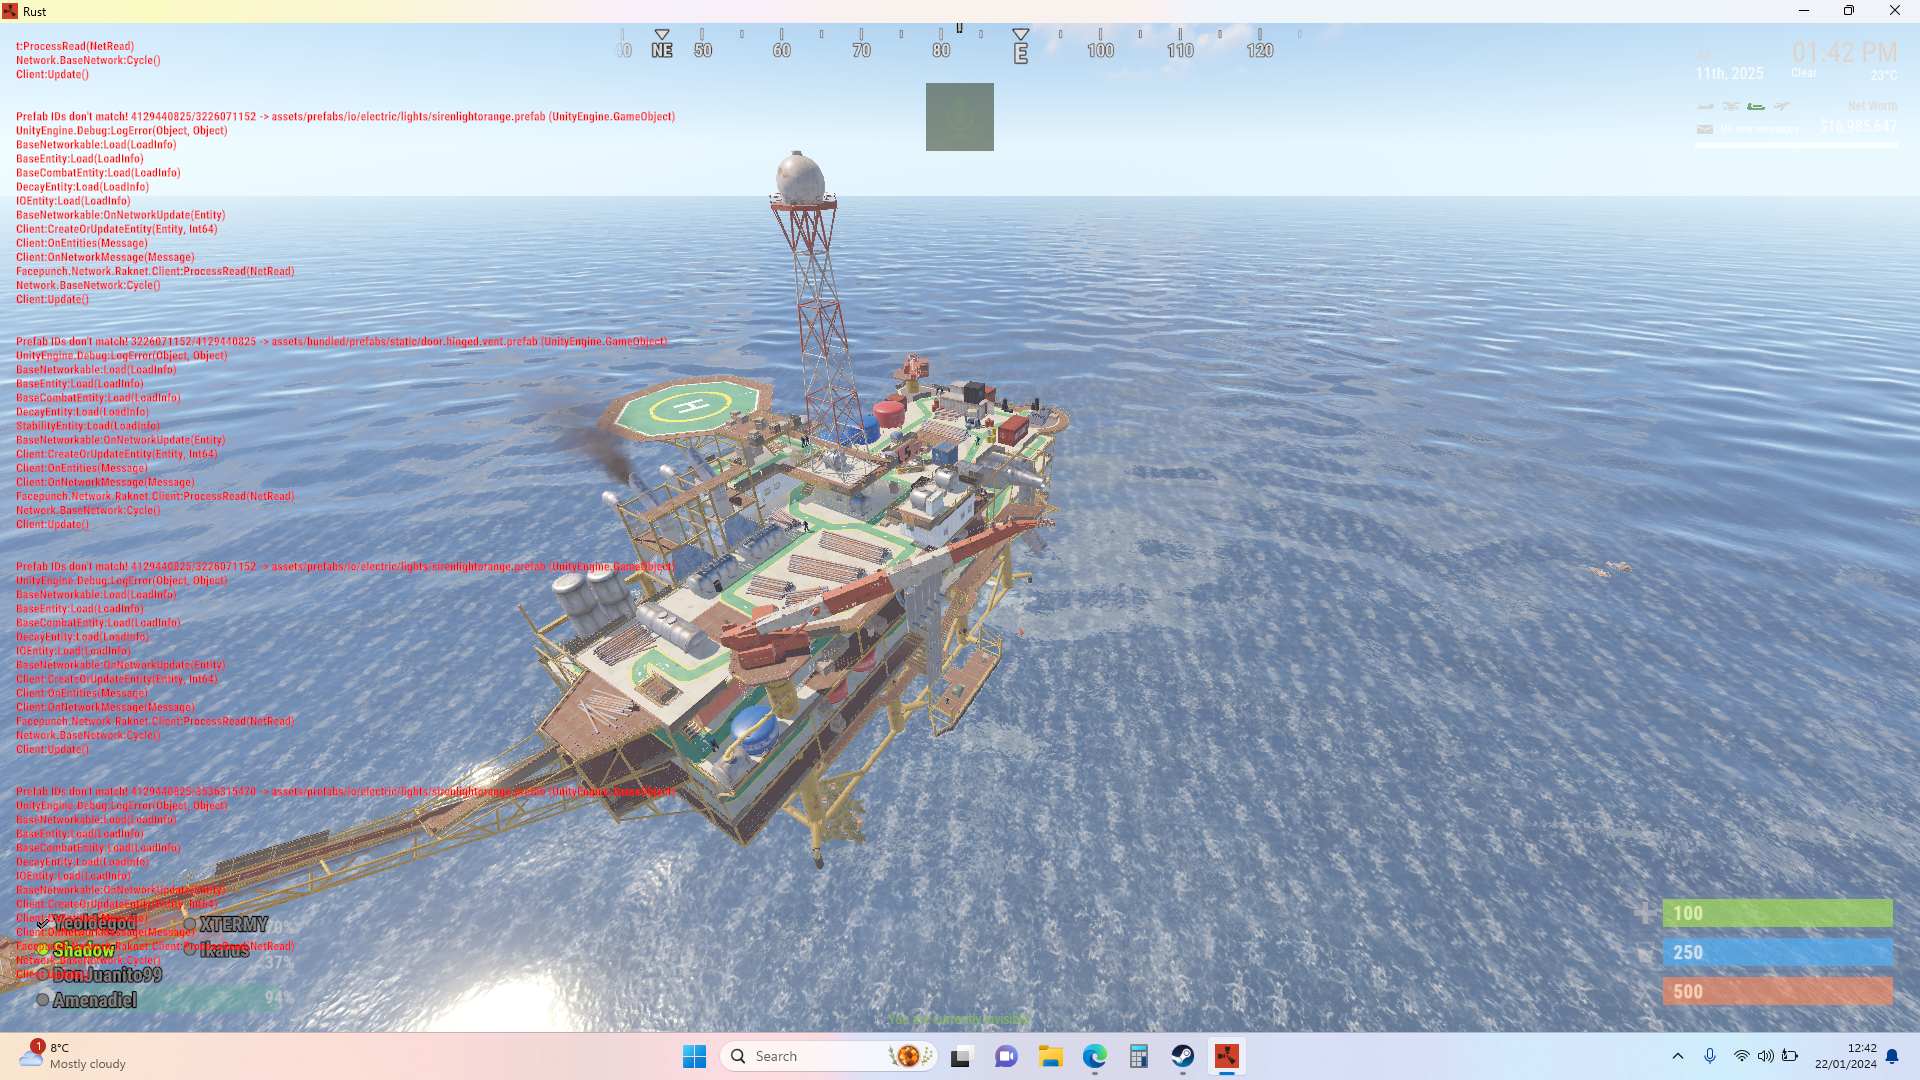 More information about "red text on screen near/ approaching large oil rig"